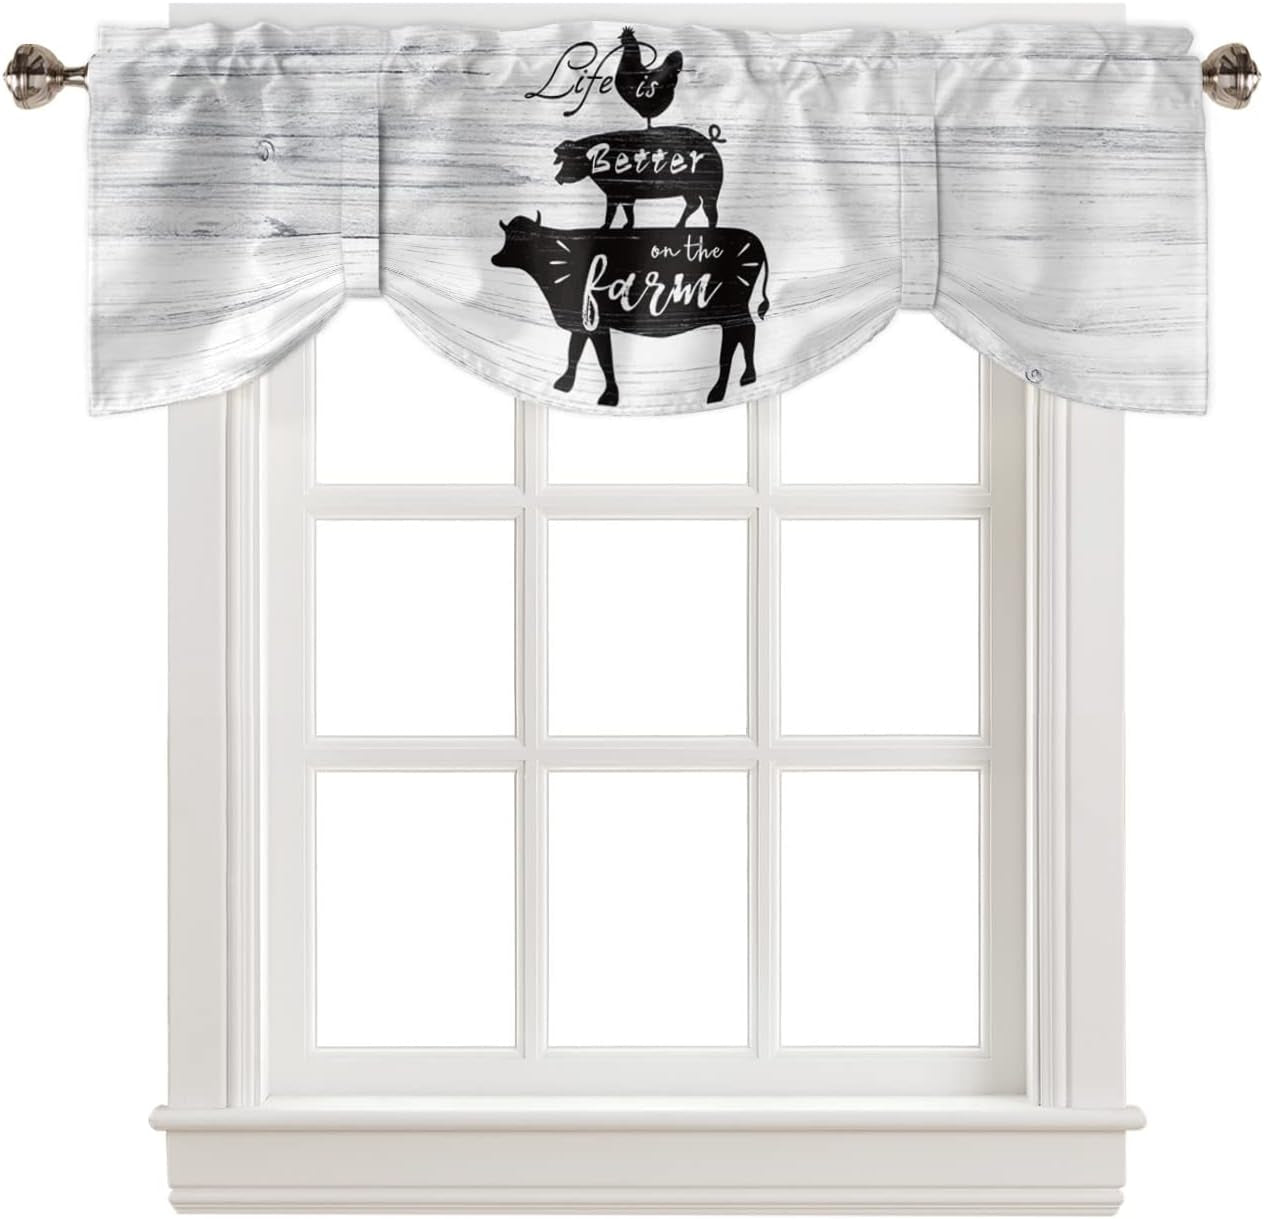 Farm Animal Cow Pig Cock Stacked Tie up Valance Curtain for Kitchen-Small Window Shade Valances Adjustable Rod Pocket Windows Treatment for Bedroom Bathroom Decor Rustic Wooden Board,1 Panel 42X18In